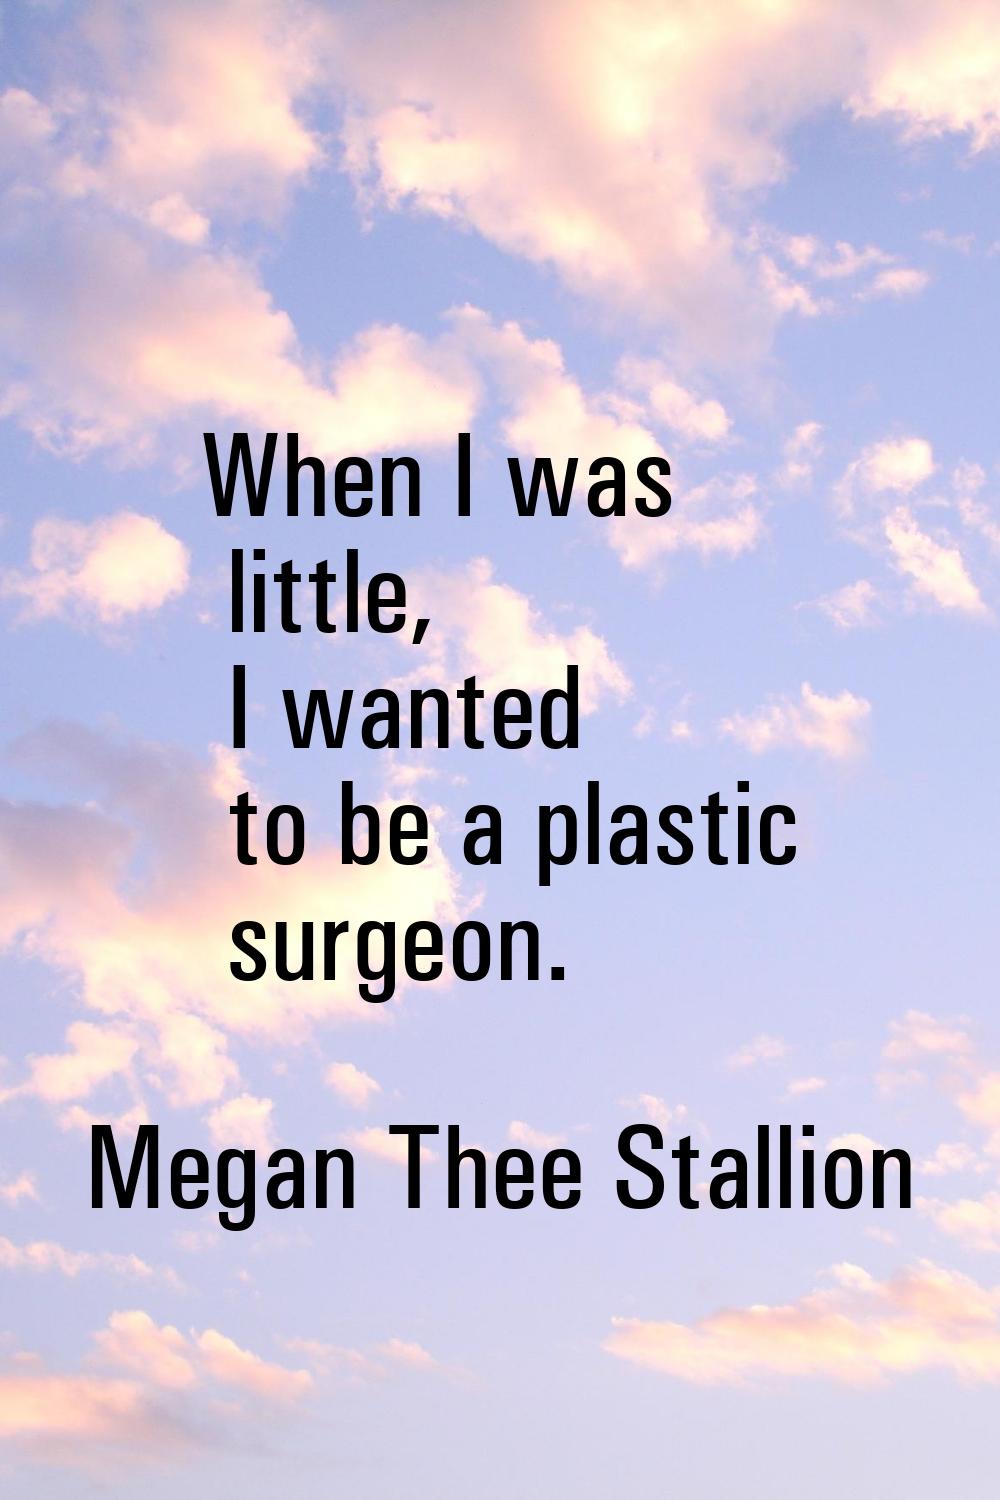 When I was little, I wanted to be a plastic surgeon.